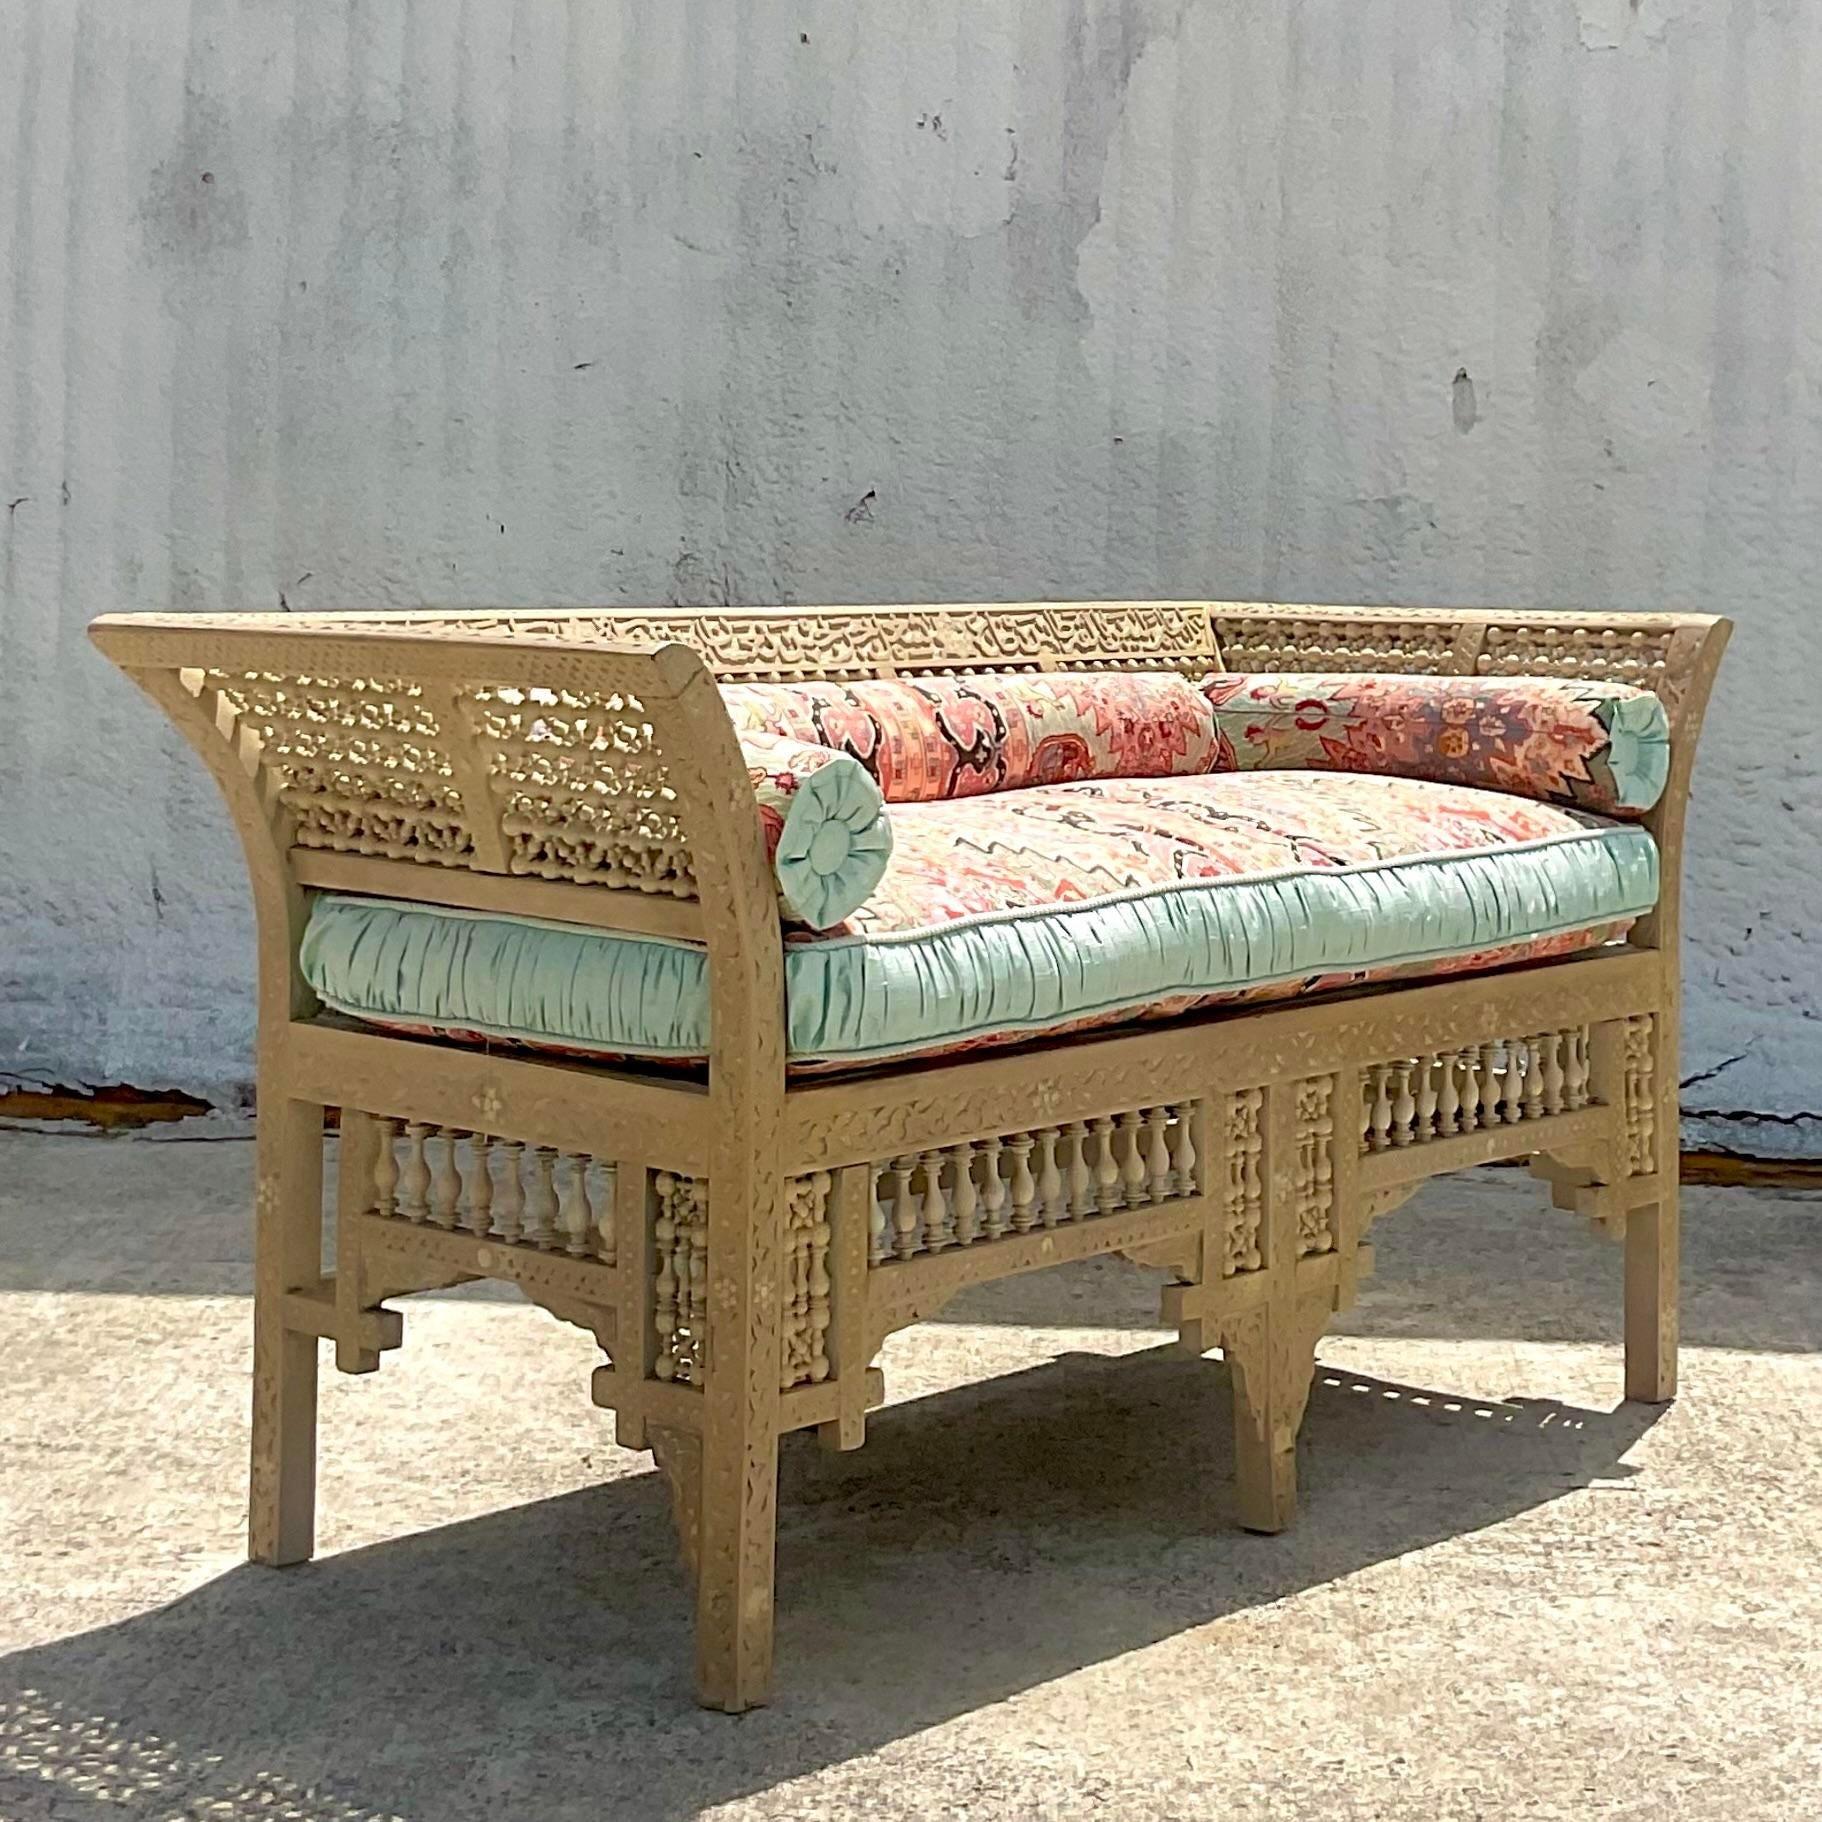 A stunning vintage Boho hand carved teak loveseat. A chic cerused finish on the classic Anglo Indian design. Beautifully upholstered in a gorgeous paisley with a ruched trim. A real showstopper. Acquired from a Palm Beach estate.